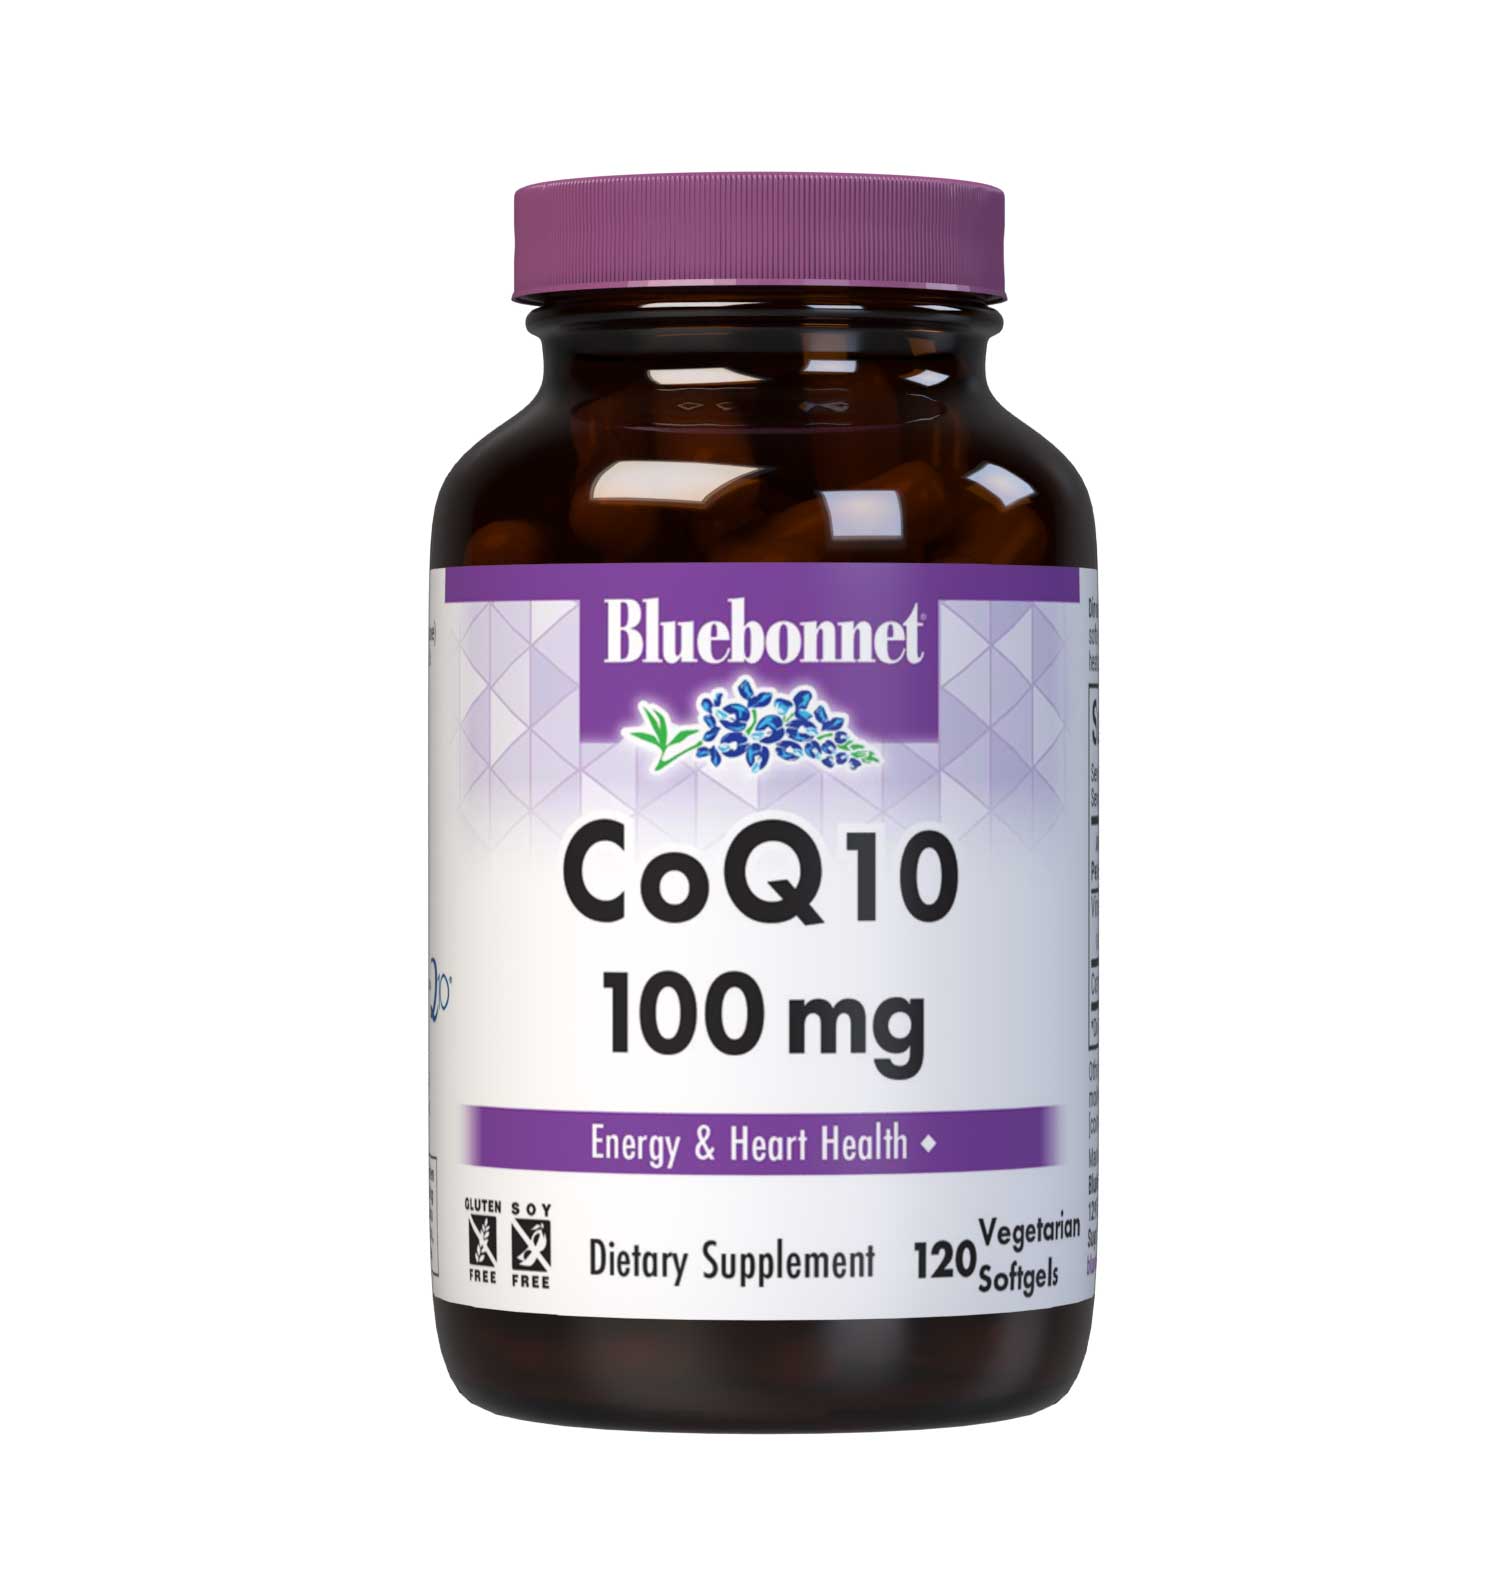 Bluebonnet’s CoQ10 30 mg 120 Vegetarian Softgels are formulated with the trans-isomer form of CoQ10 (ubiquinone) in a base of non-GMO sunflower oil along with vitamin E to support energy levels and cardiovascular health. #size_120 count